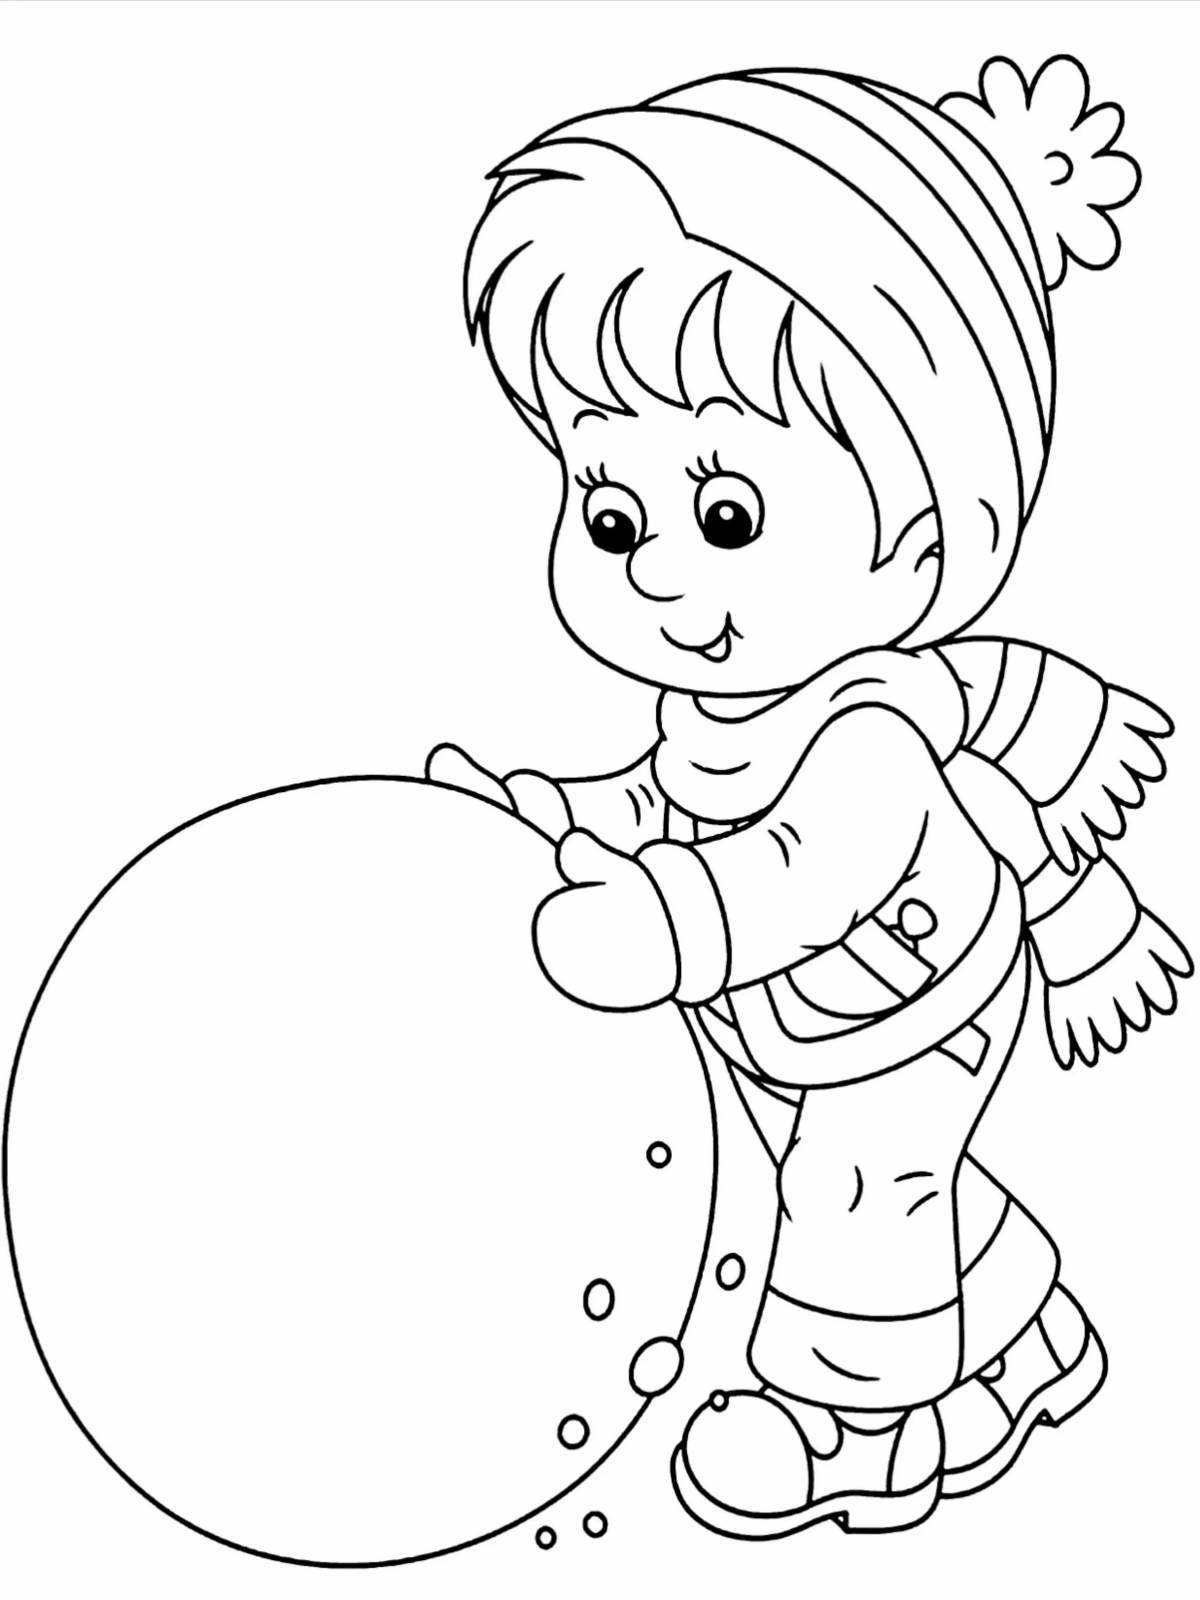 Children's happy snowball coloring book